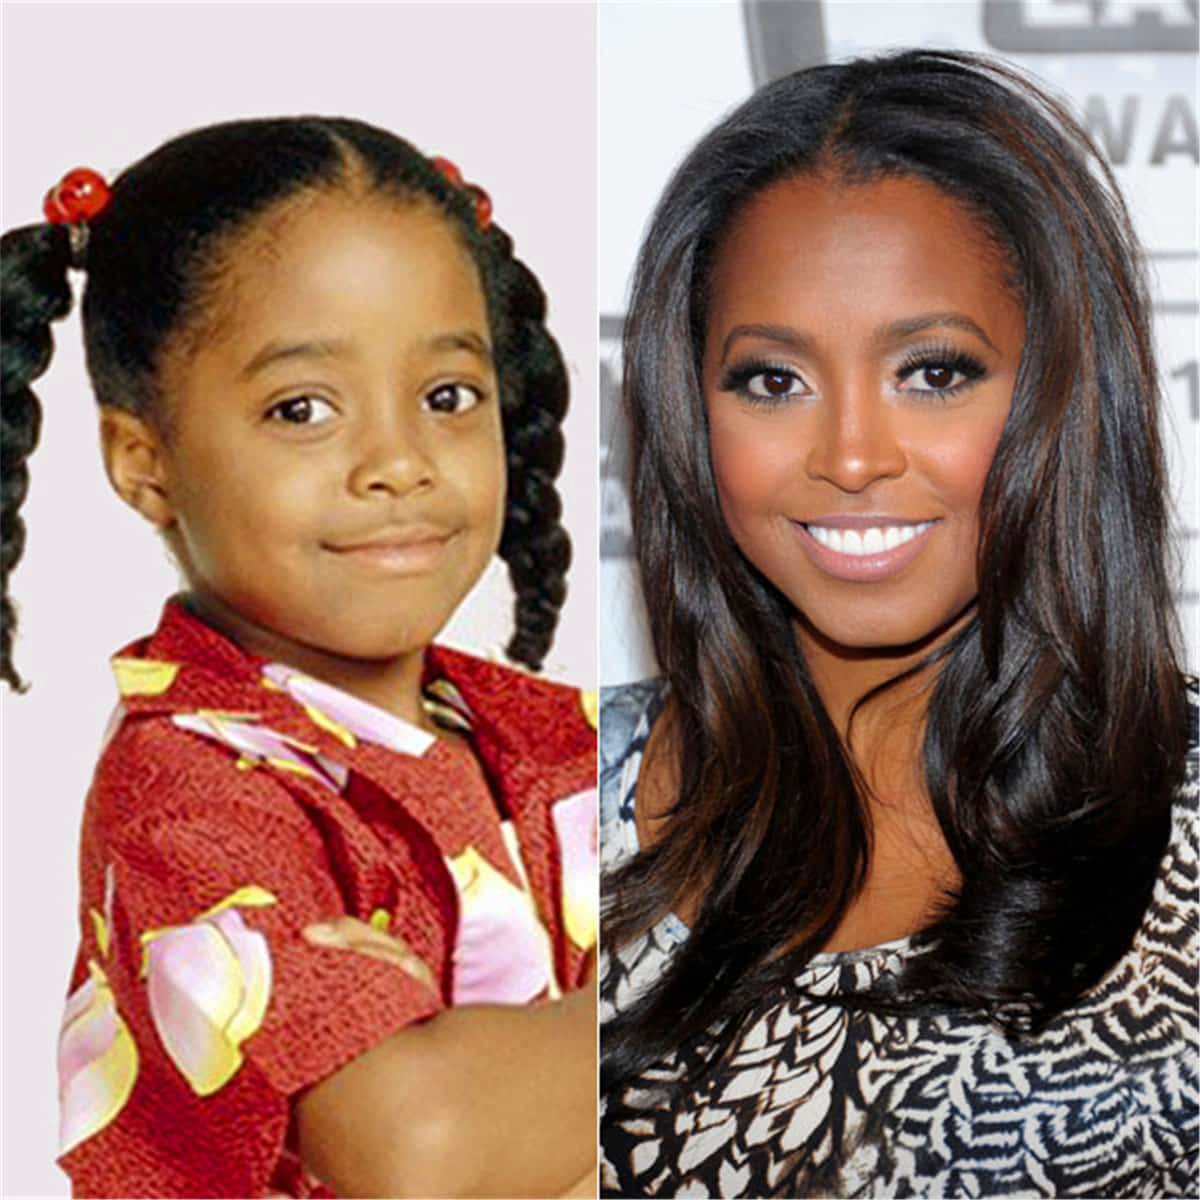 10 cute celebrity kids who grew up not so innocent